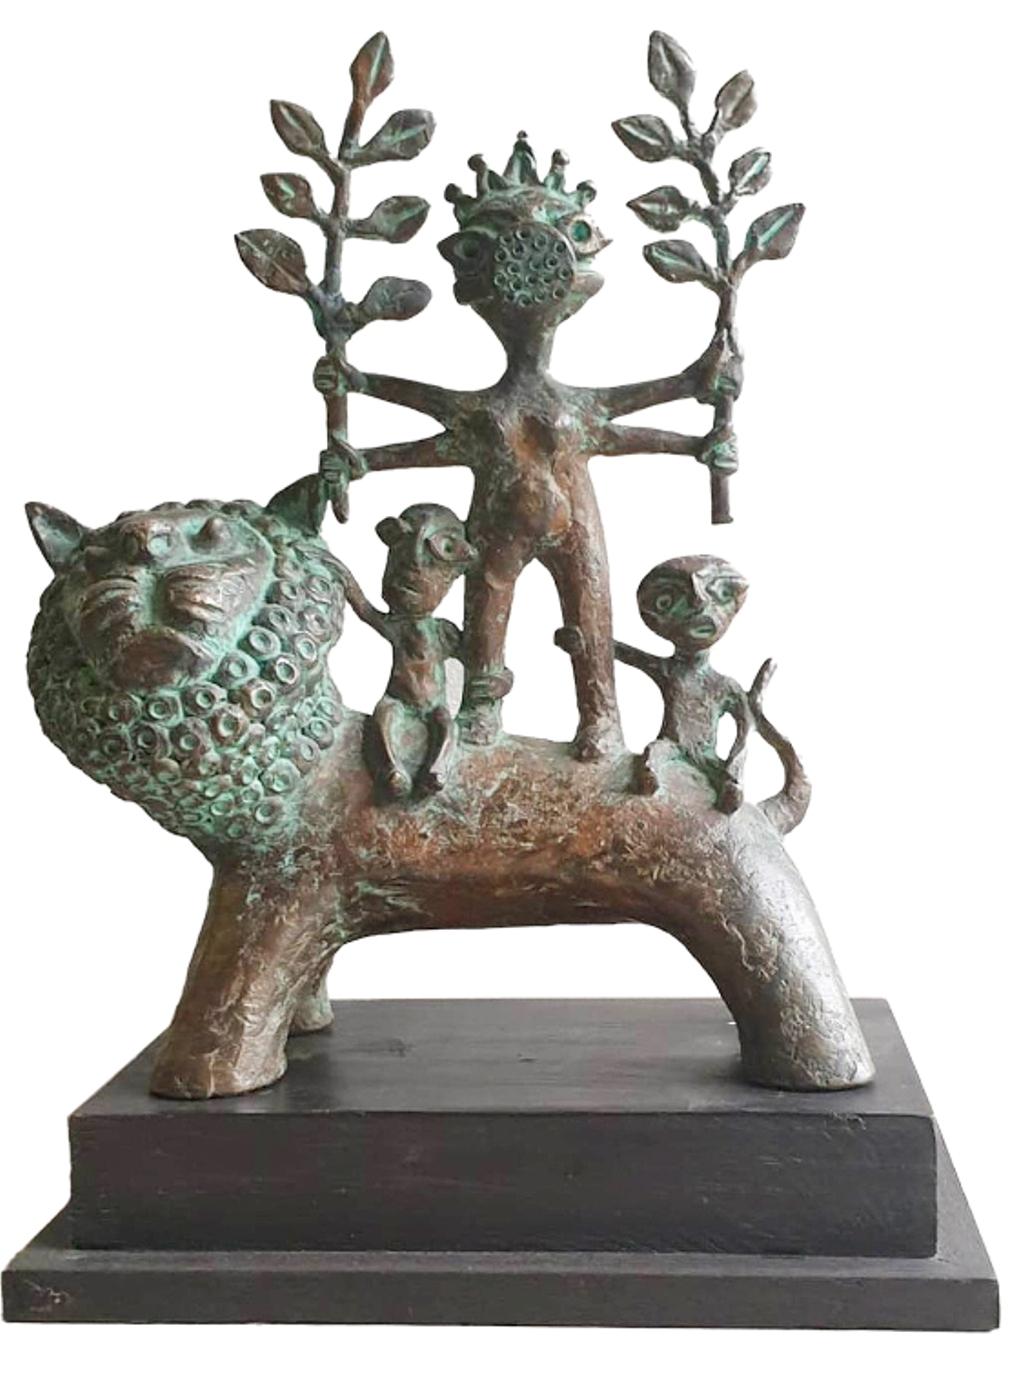 Subrata Biswas Figurative Sculpture - Mother Nature, Figurative Bronze by Contemporary Indian Artist "In Stock"